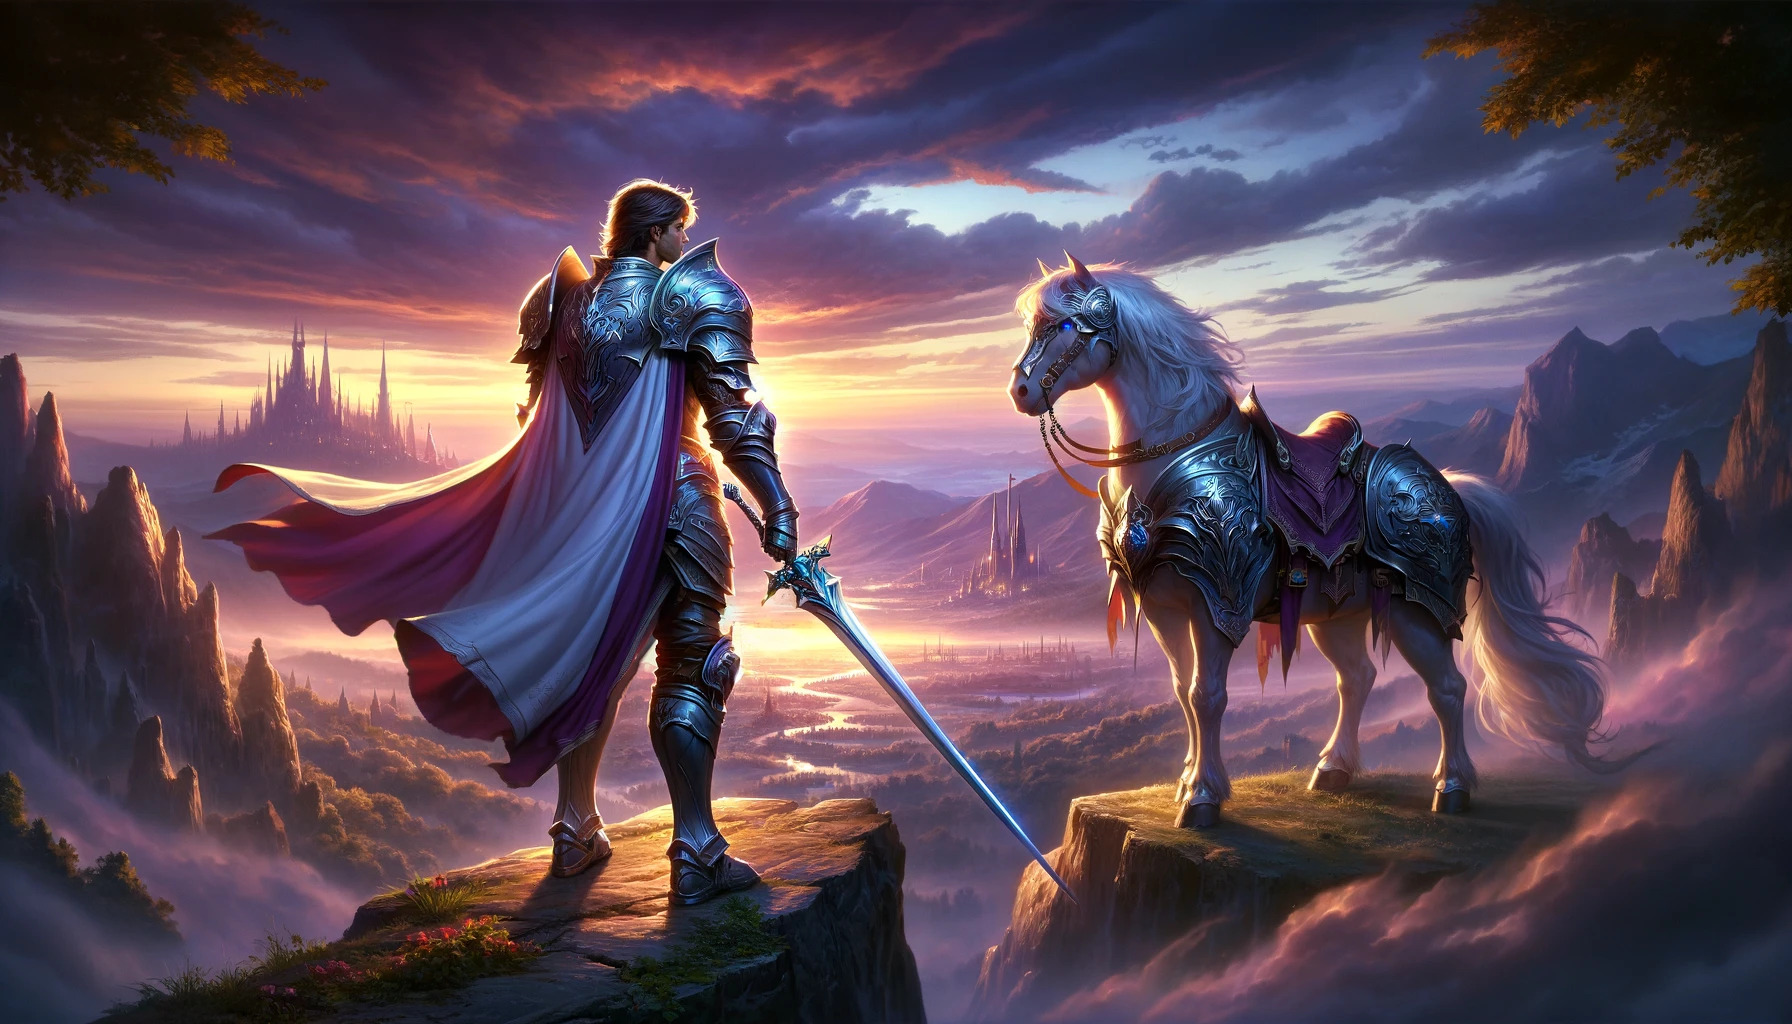 an image inspired by the concept of a paladin, capturing the essence of chivalry, courage, and guardianship. This cinematic scene showcases a paladin overlooking a vast kingdom at dusk, embodying the spirit of adventure and nobility.